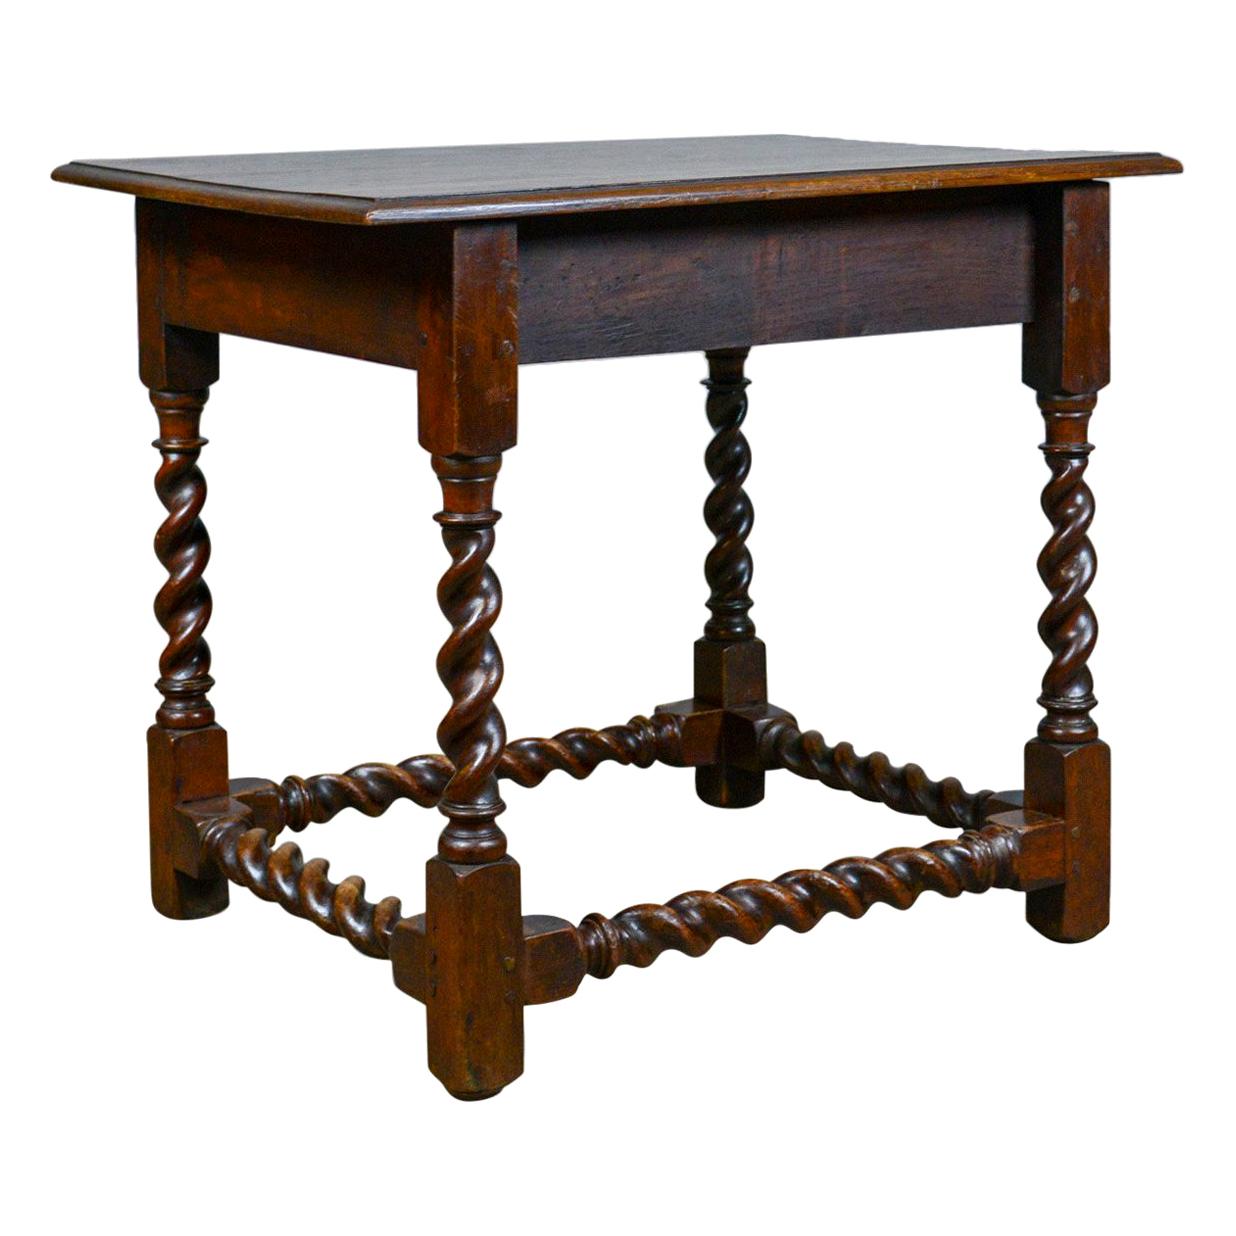 Antique Side Table, English, Victorian, English, Oak, Late 19th Century